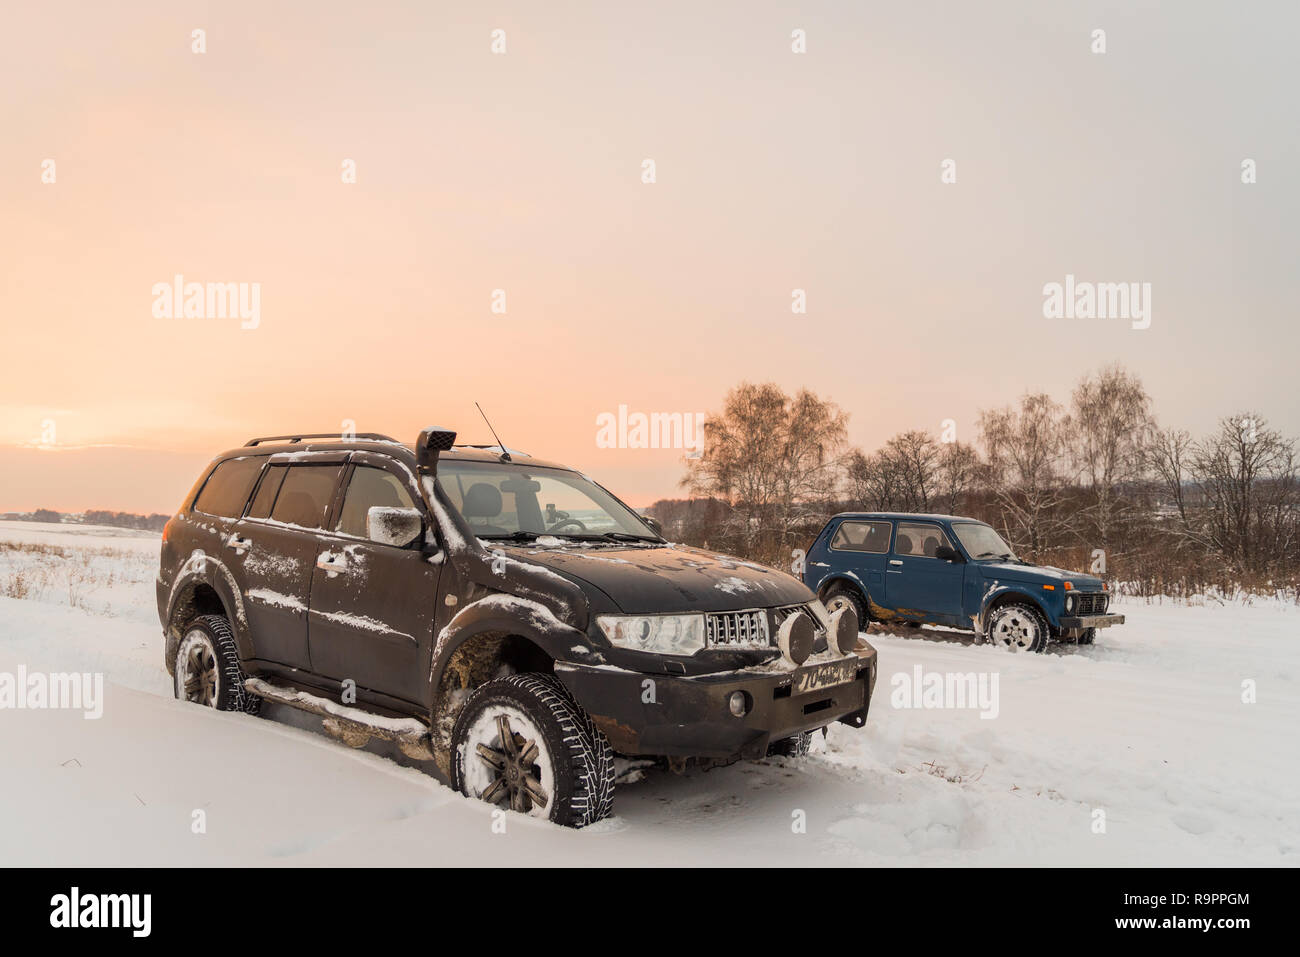 Moscow, Russia - December 25, 2018: Off-road cars Mitsubishi Pajero Sport (Montero) and Lada Niva 4x4 (VAZ 2121 / 21214)  parked on the snow field. Stock Photo